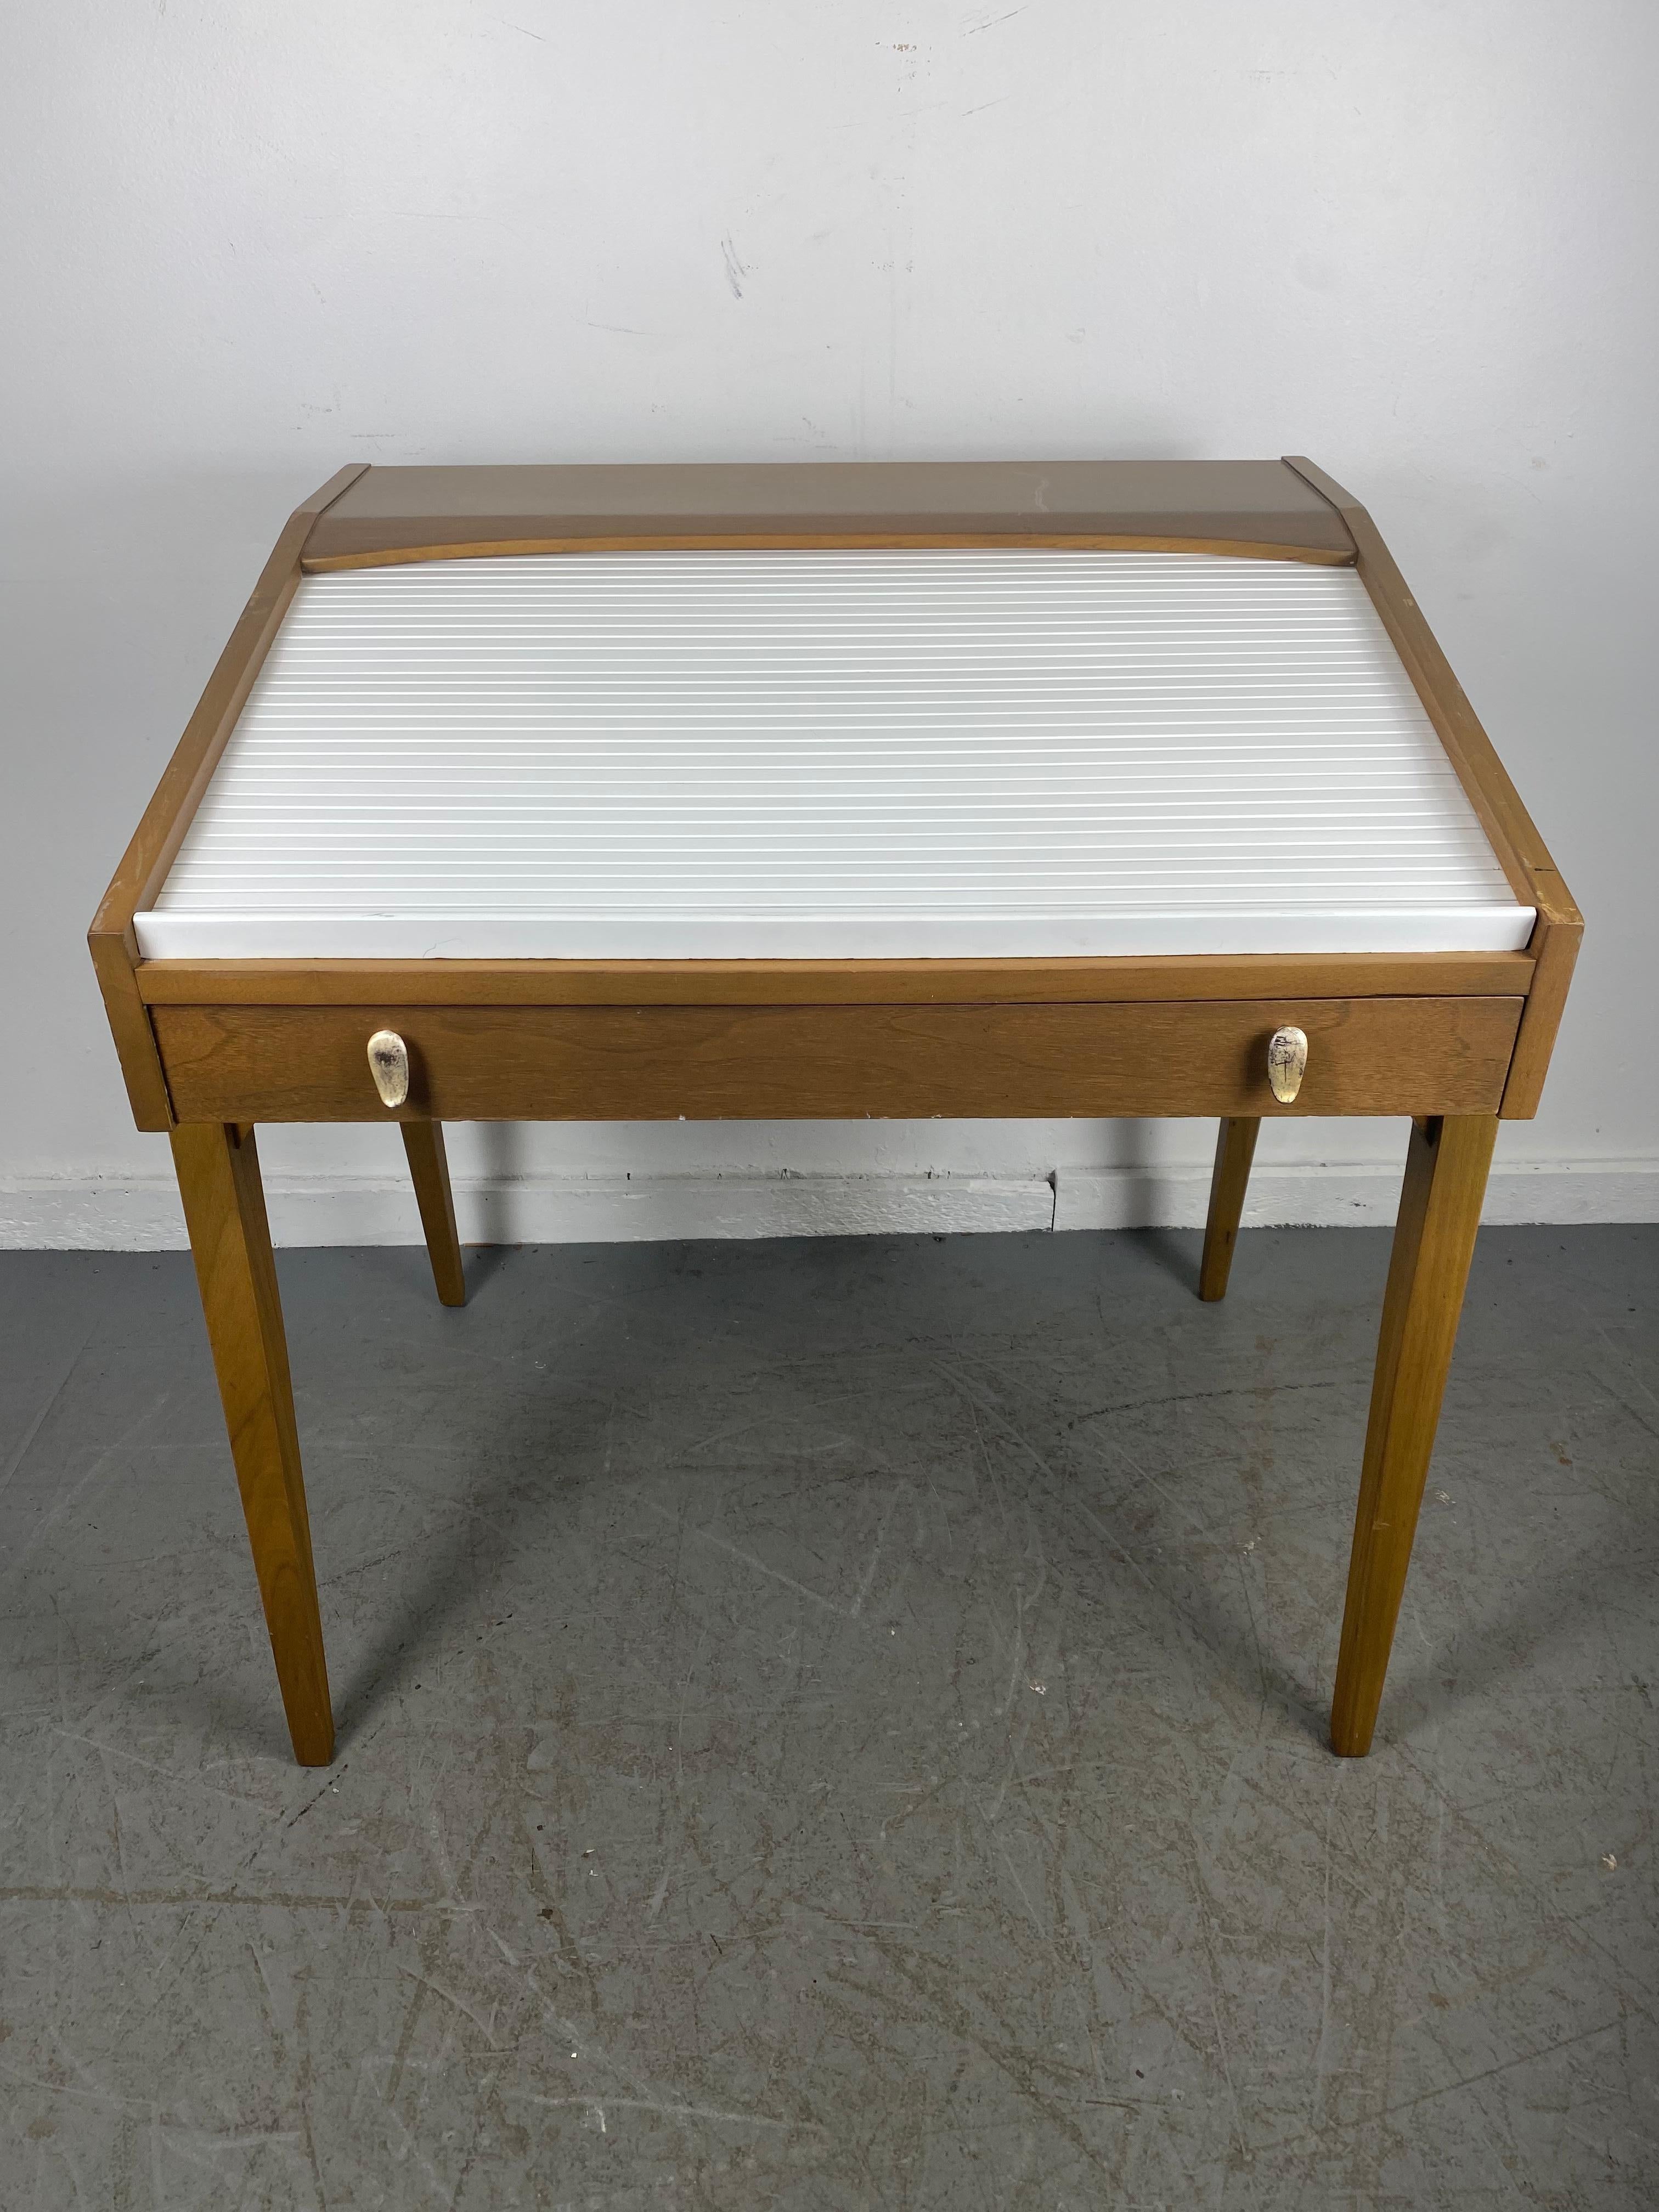 Designer: John Van Koert
Manufacturer: Drexel “Profile”
Period/Style: Mid Century Modern
Country: United States
Date: 1950's.................. WHITE LACQUER TAMBOUR DOOR ROOL TOP..,, Hand delivery avail to New York City or anywhere en route from